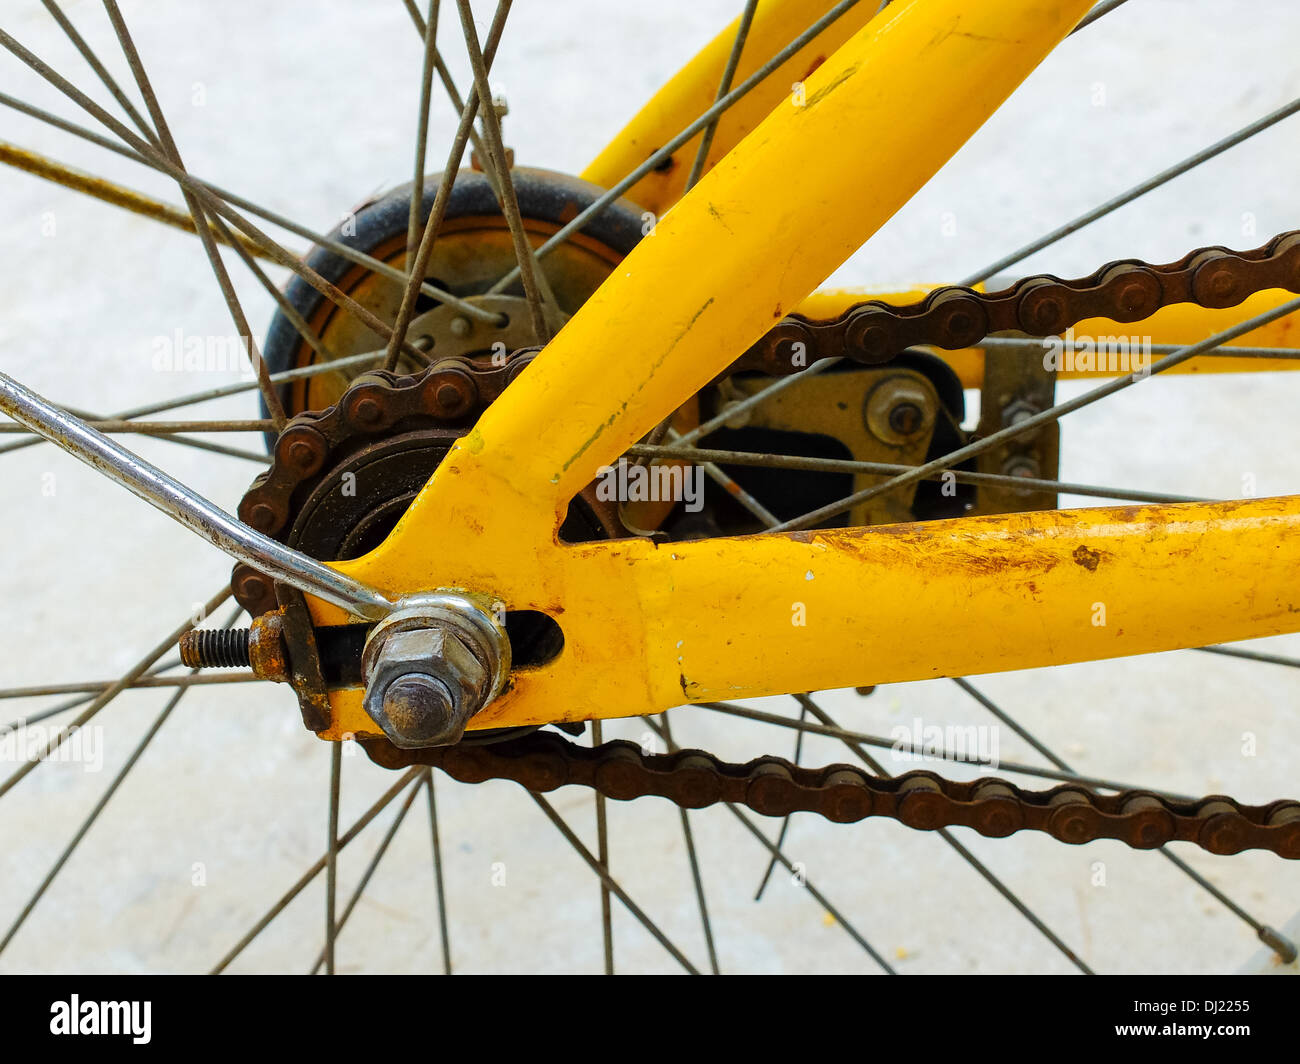 Details of an old yellow bicycle wheel spoke Stock Photo